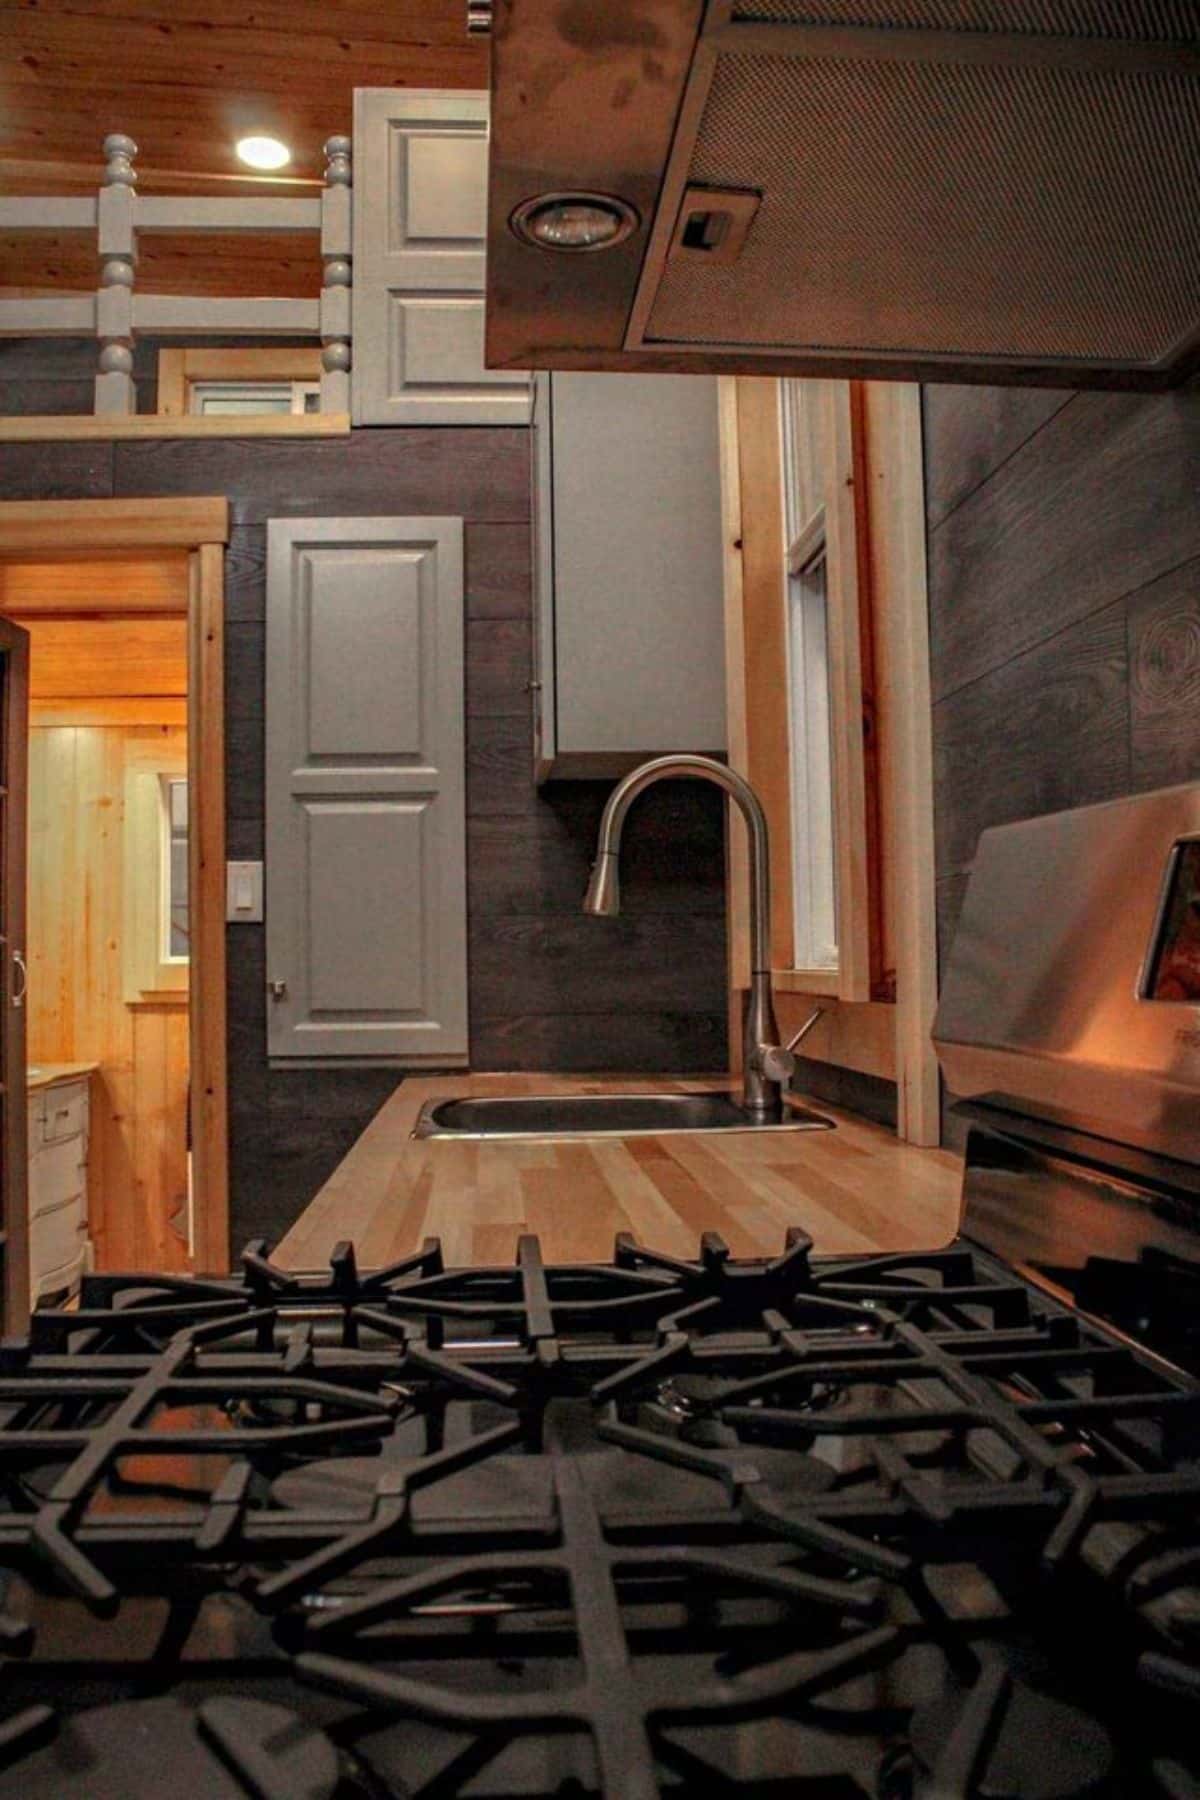 stove and sink with huge countertop in the kitchen area of beautiful tiny house